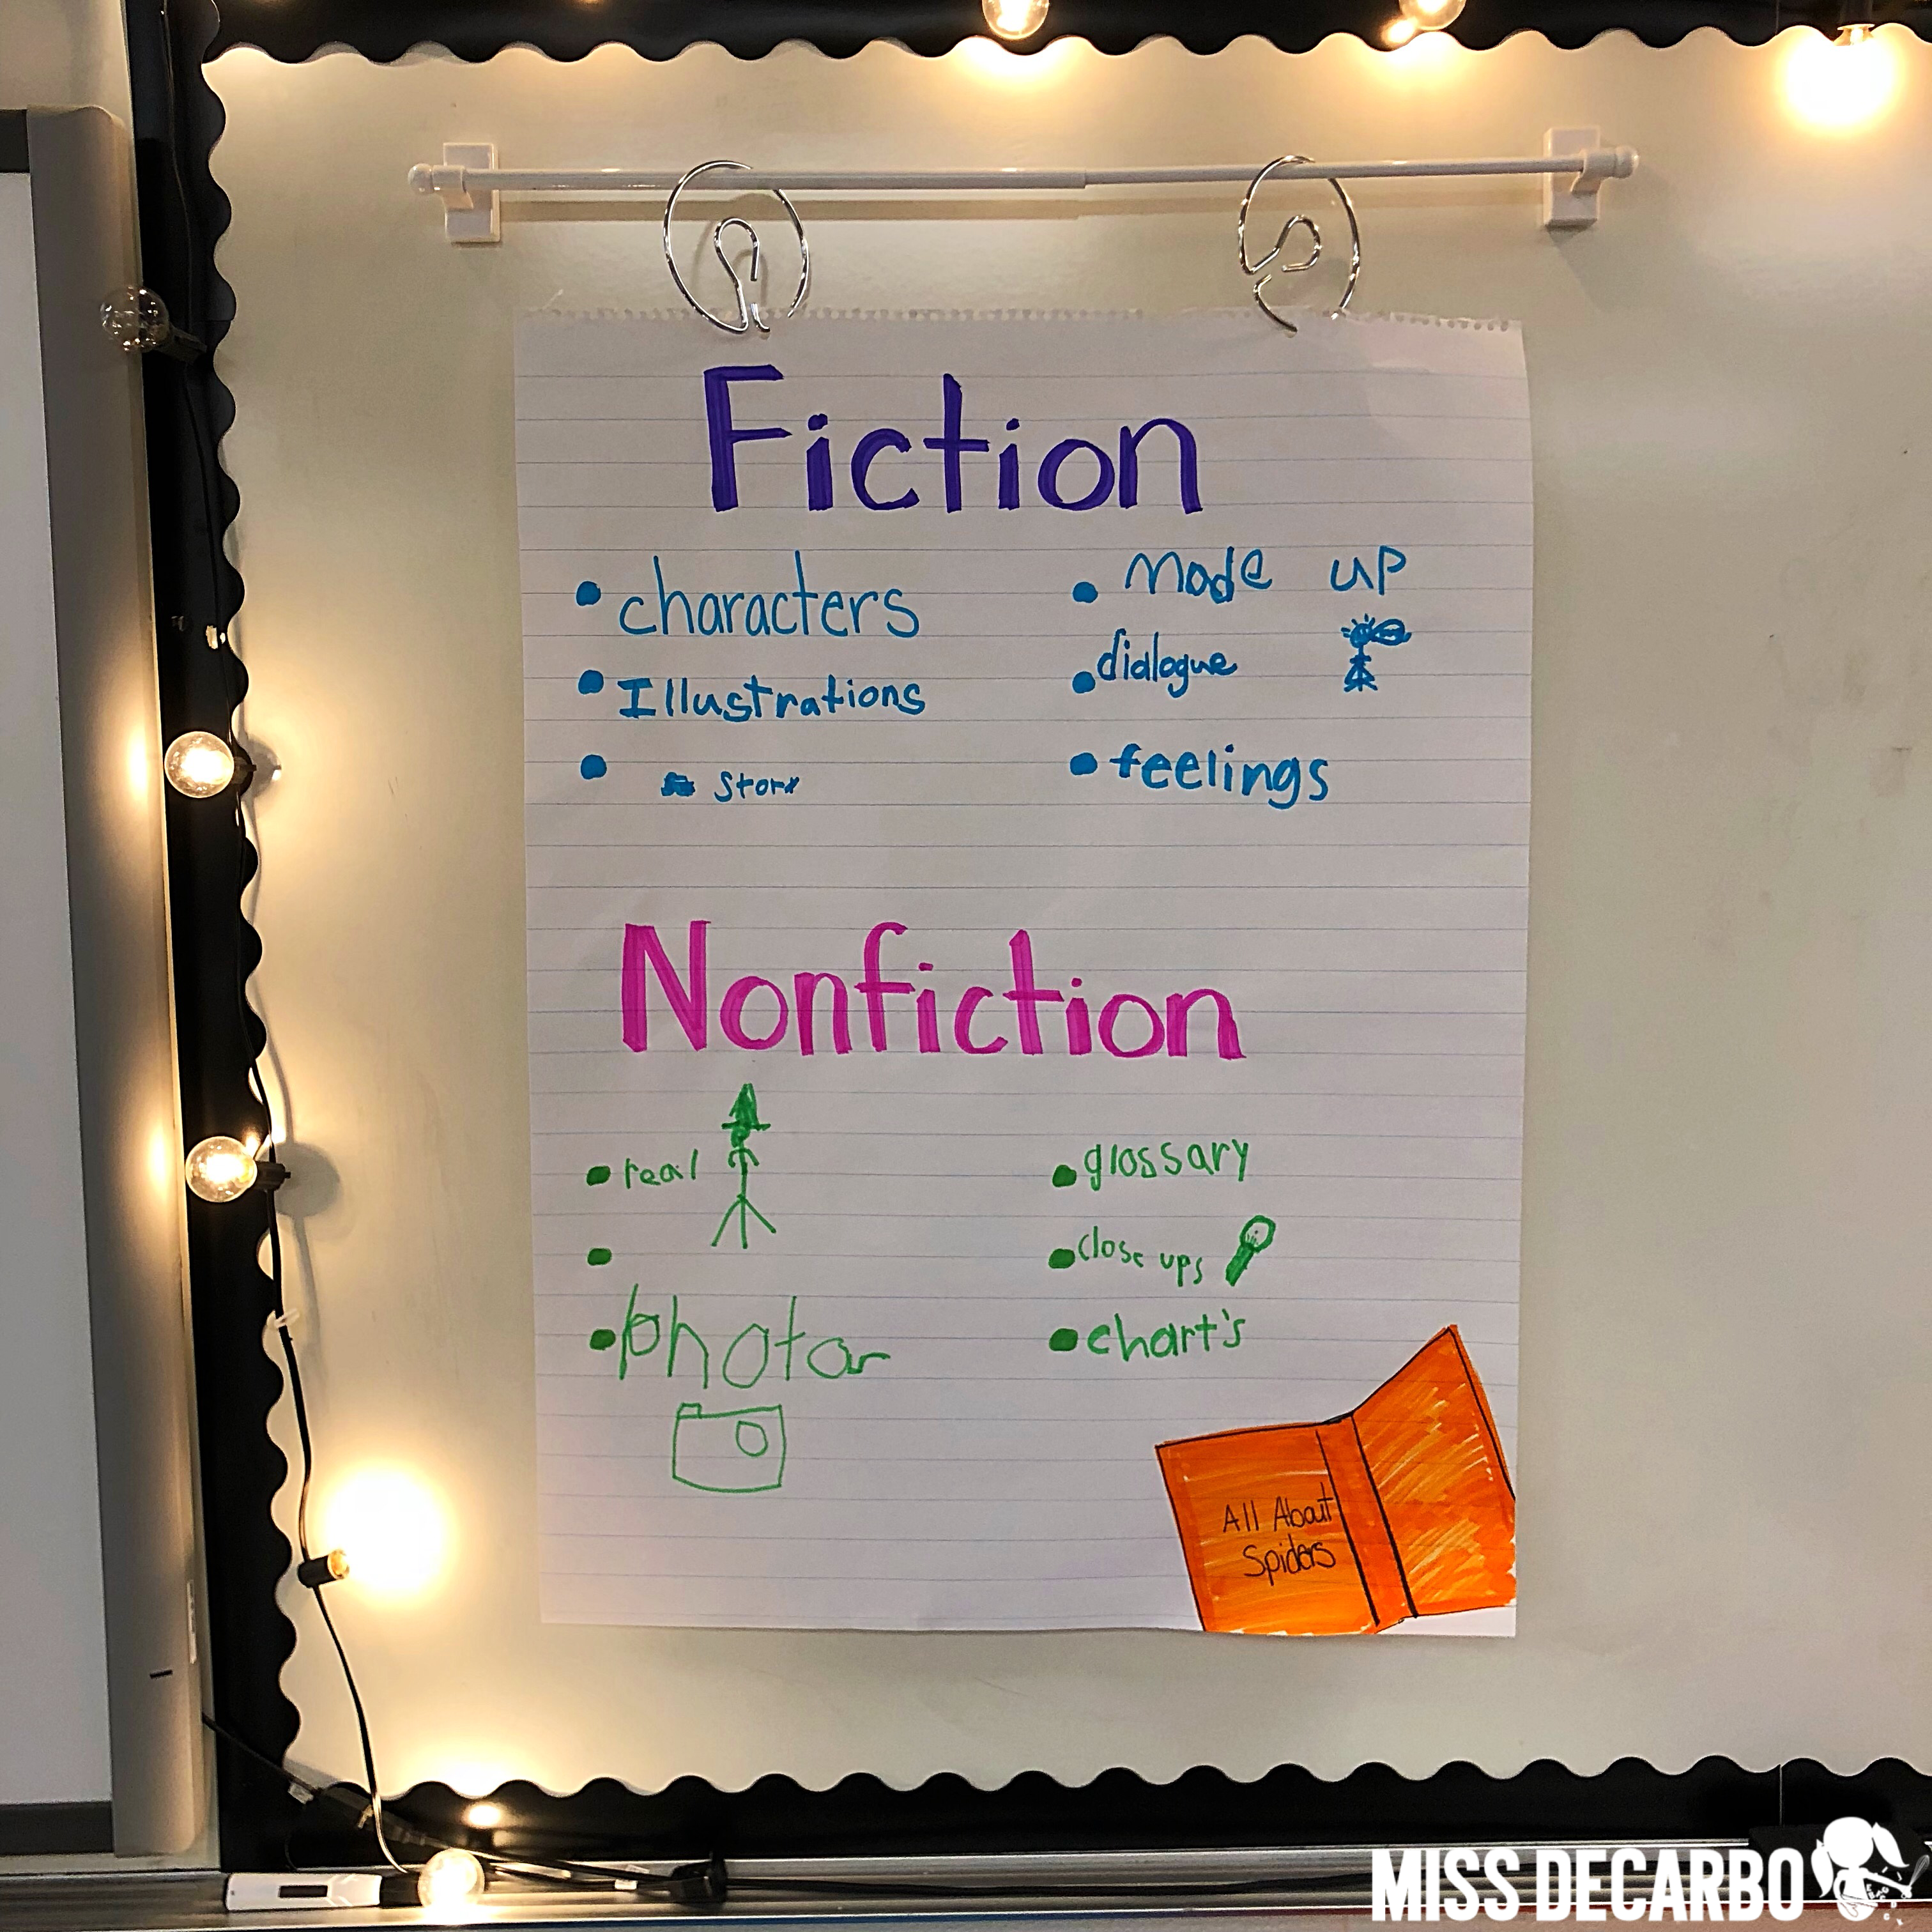 fiction and nonfiction anchor chart for reading - Have students create their own fiction and nonfiction anchor chart after exploring your classroom library #fictionandnonfiction #readinglessons